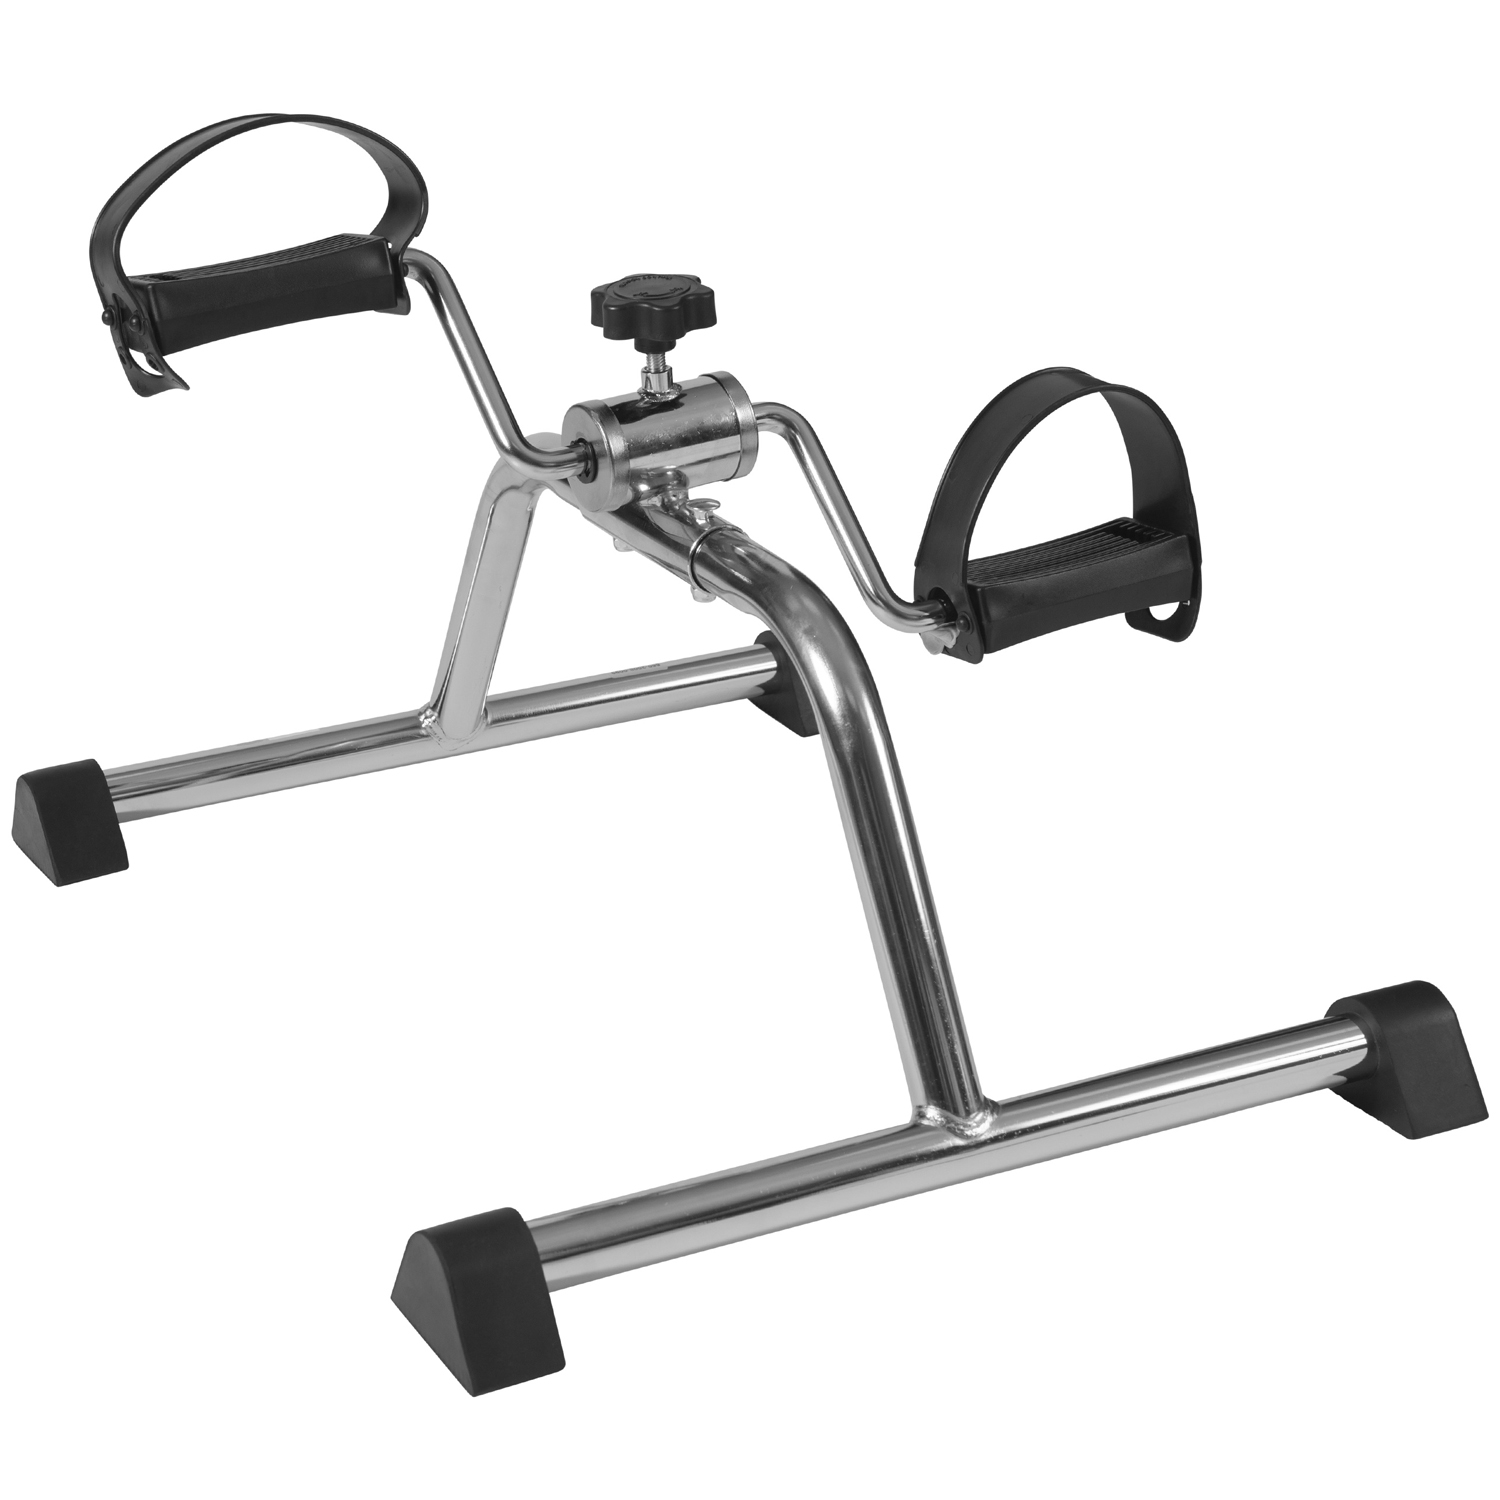 DMI Lightweight Mini Pedal Exerciser for Arms and Legs - image 1 of 5